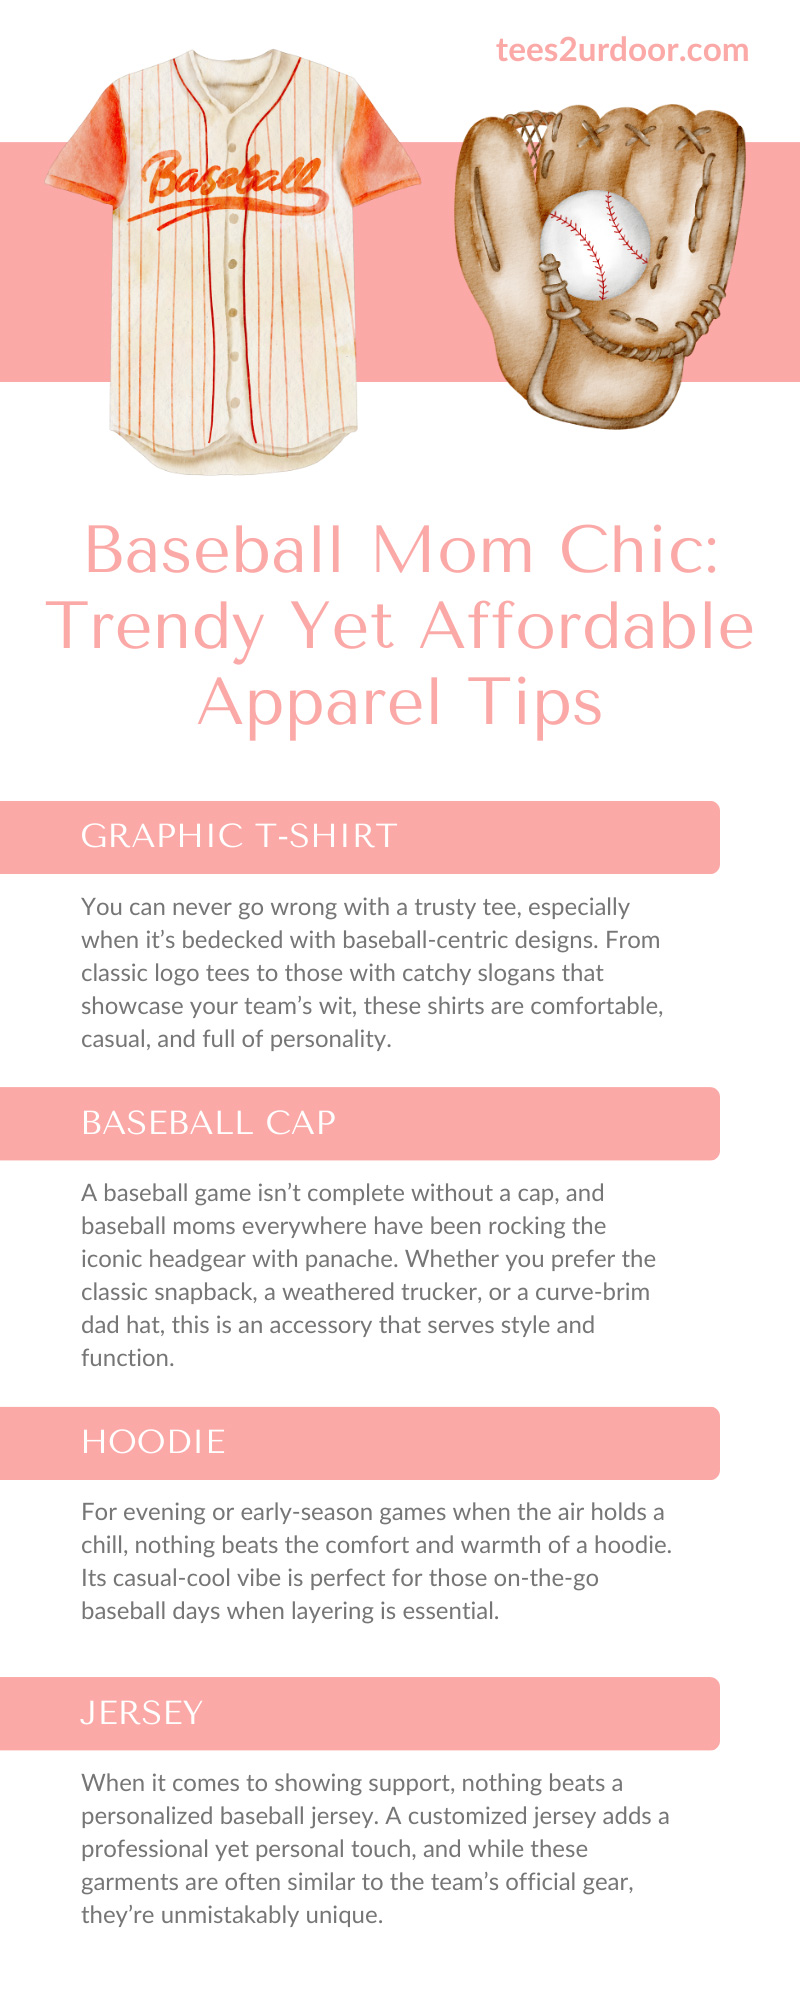 Baseball Mom Chic: Trendy Yet Affordable Apparel Tips